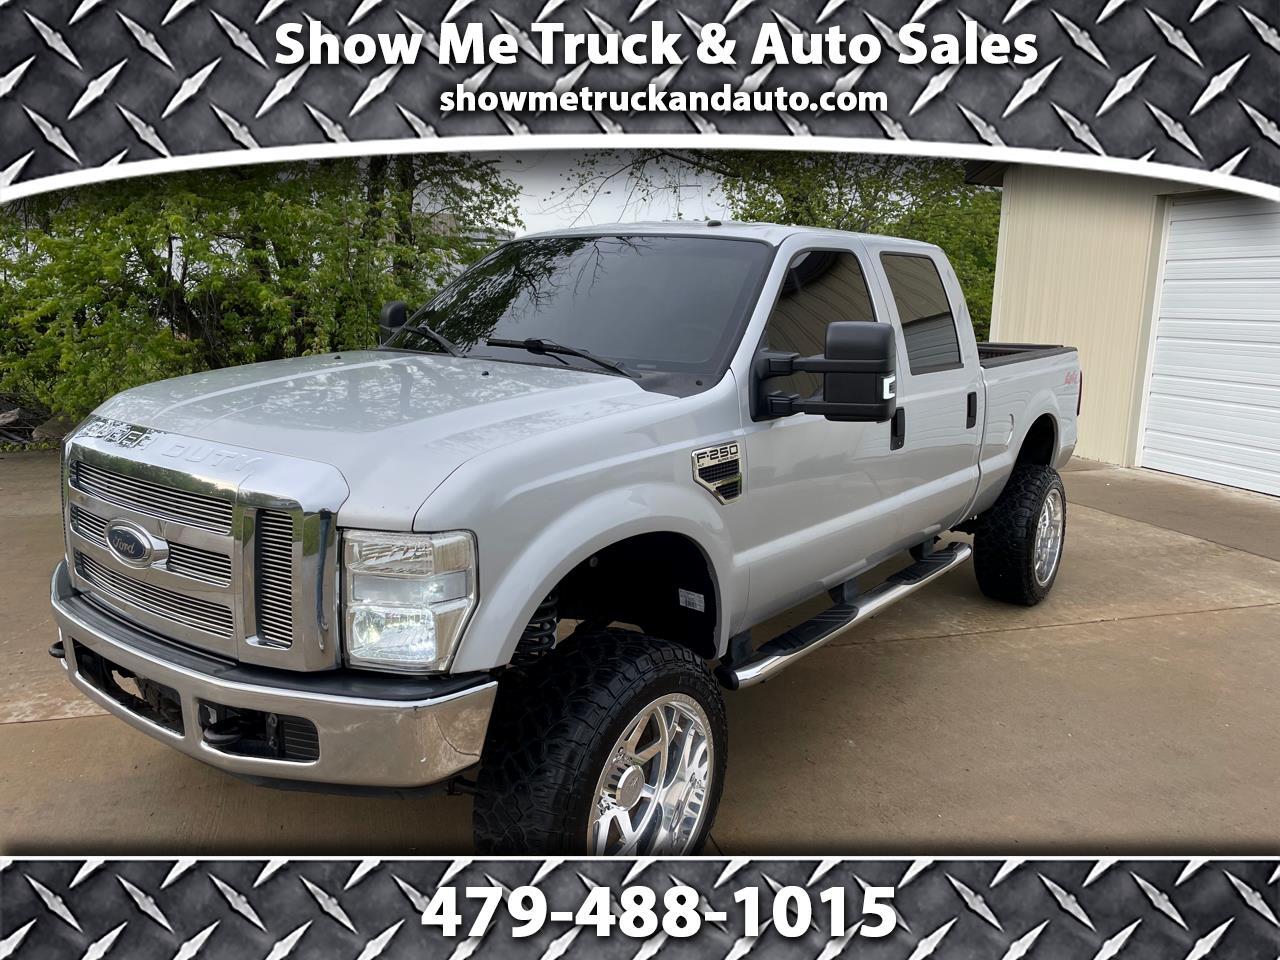 2008 Ford F-250 SD XLT Crew Cab Short Bed 4WD